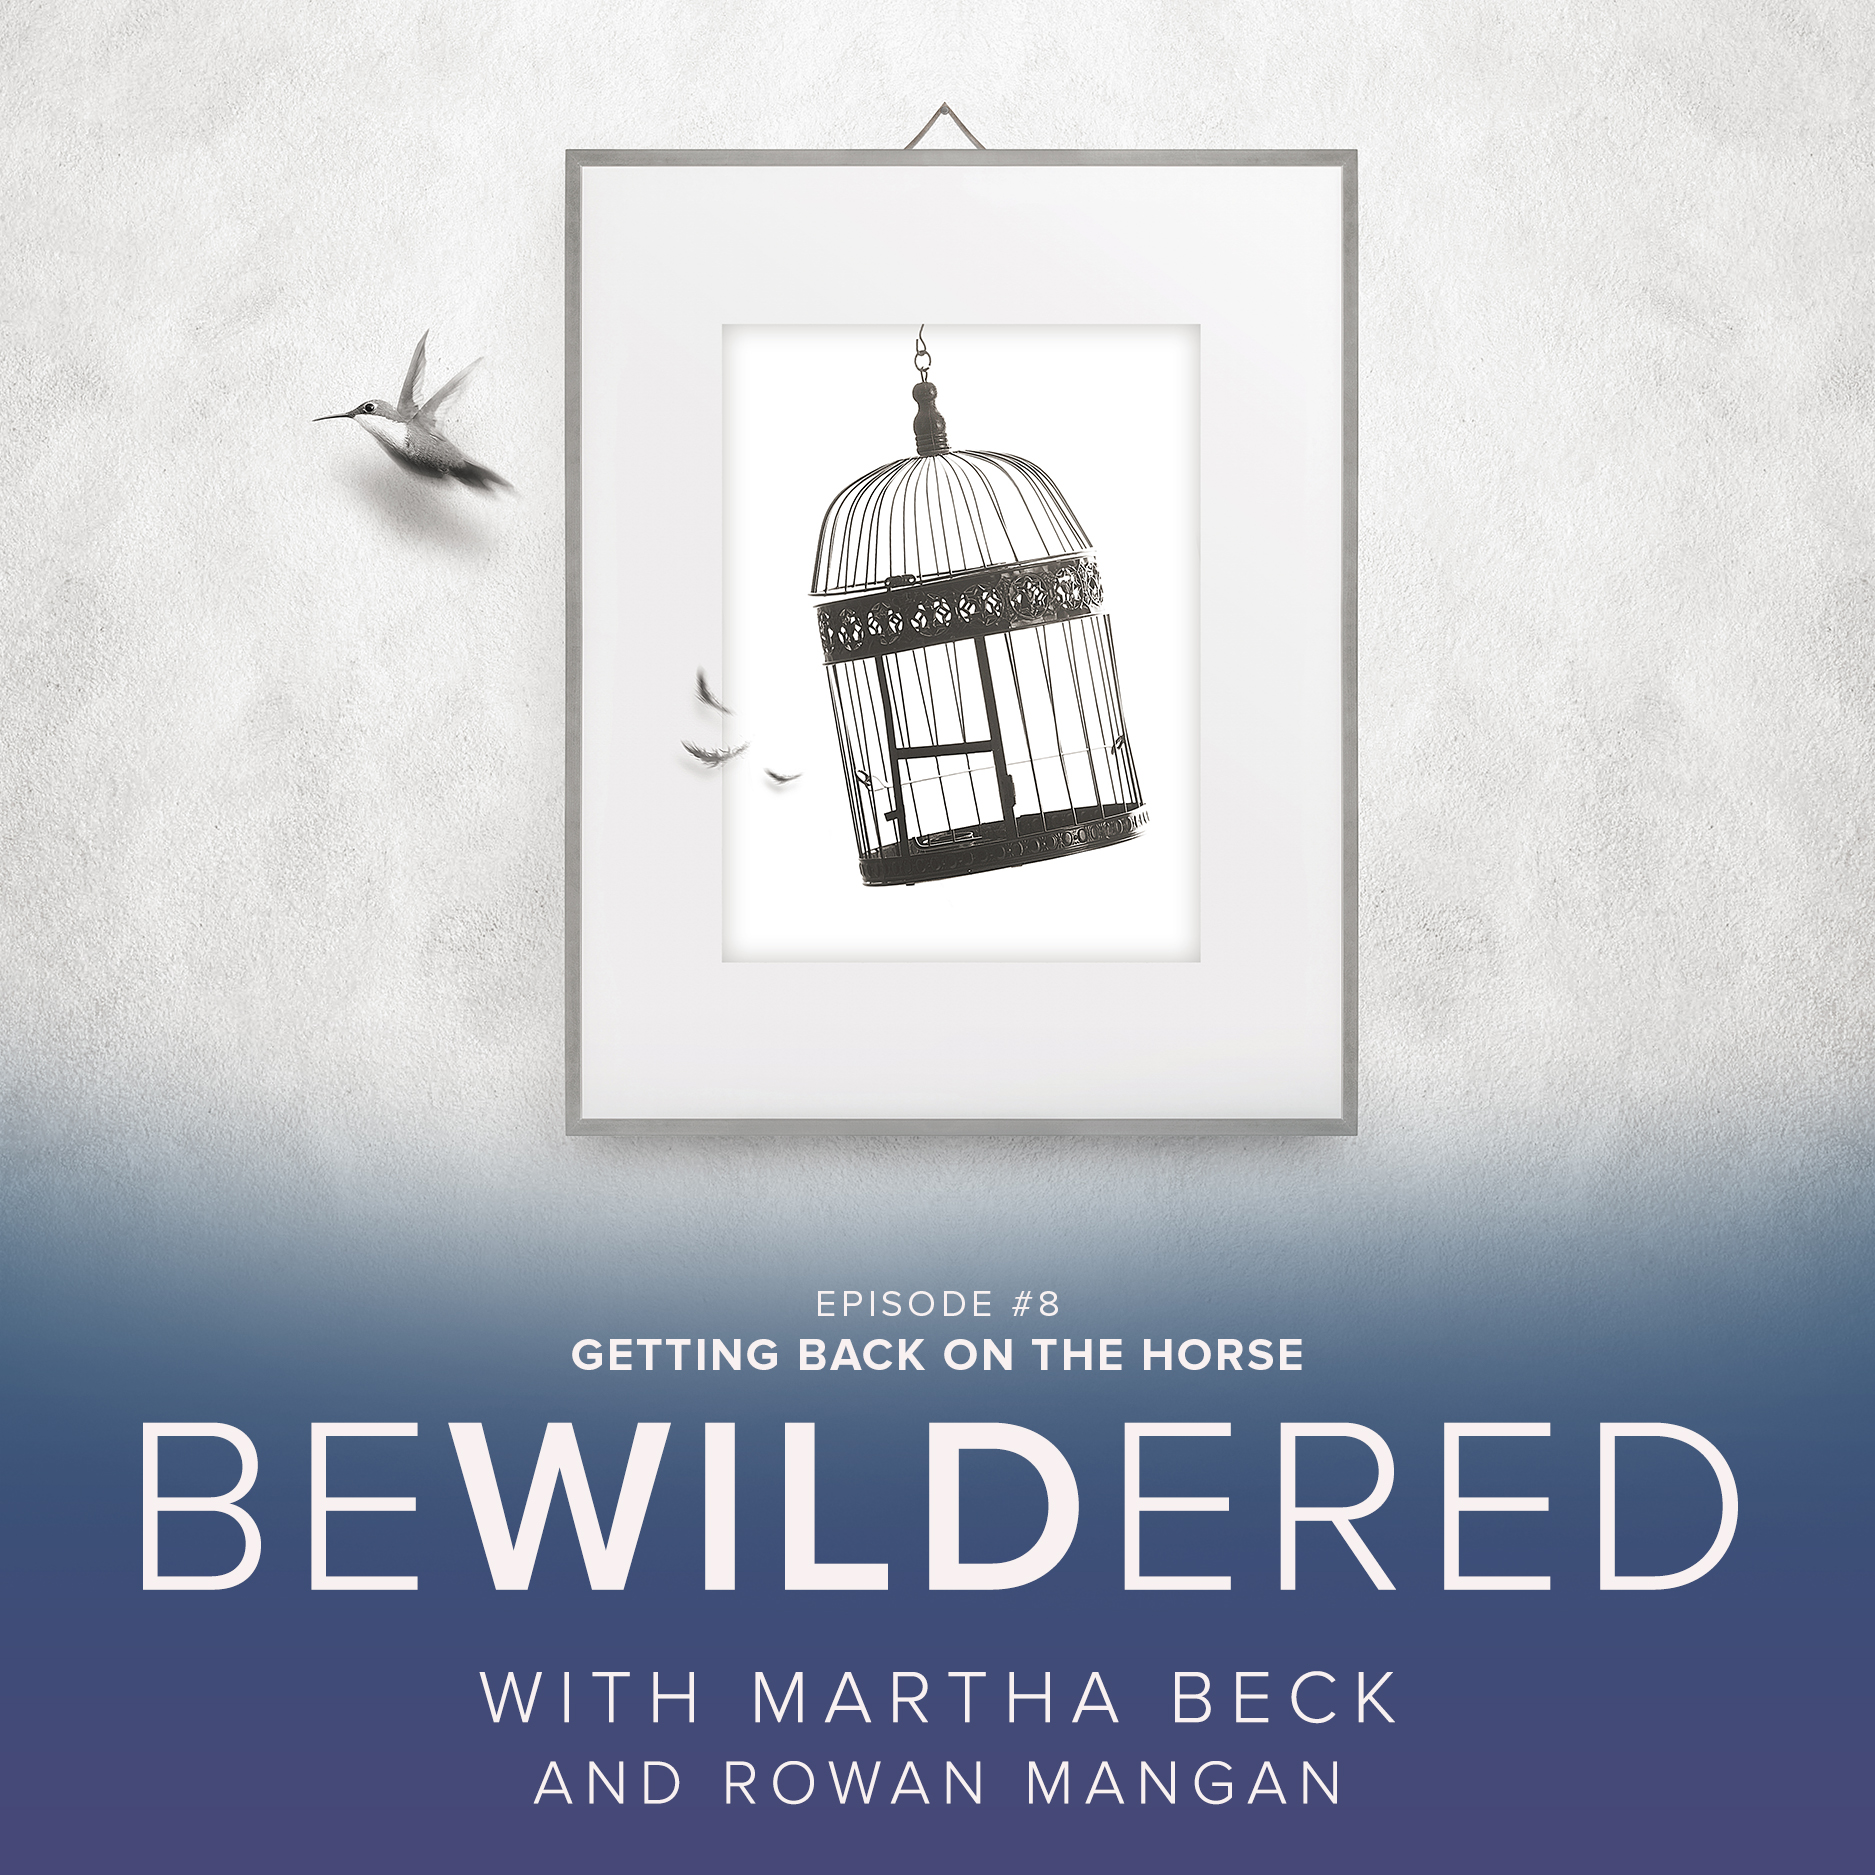 Image for Episode #8 Getting Back on the Horse for the Bewildered Podcast with Martha Beck and Rowan Mangan